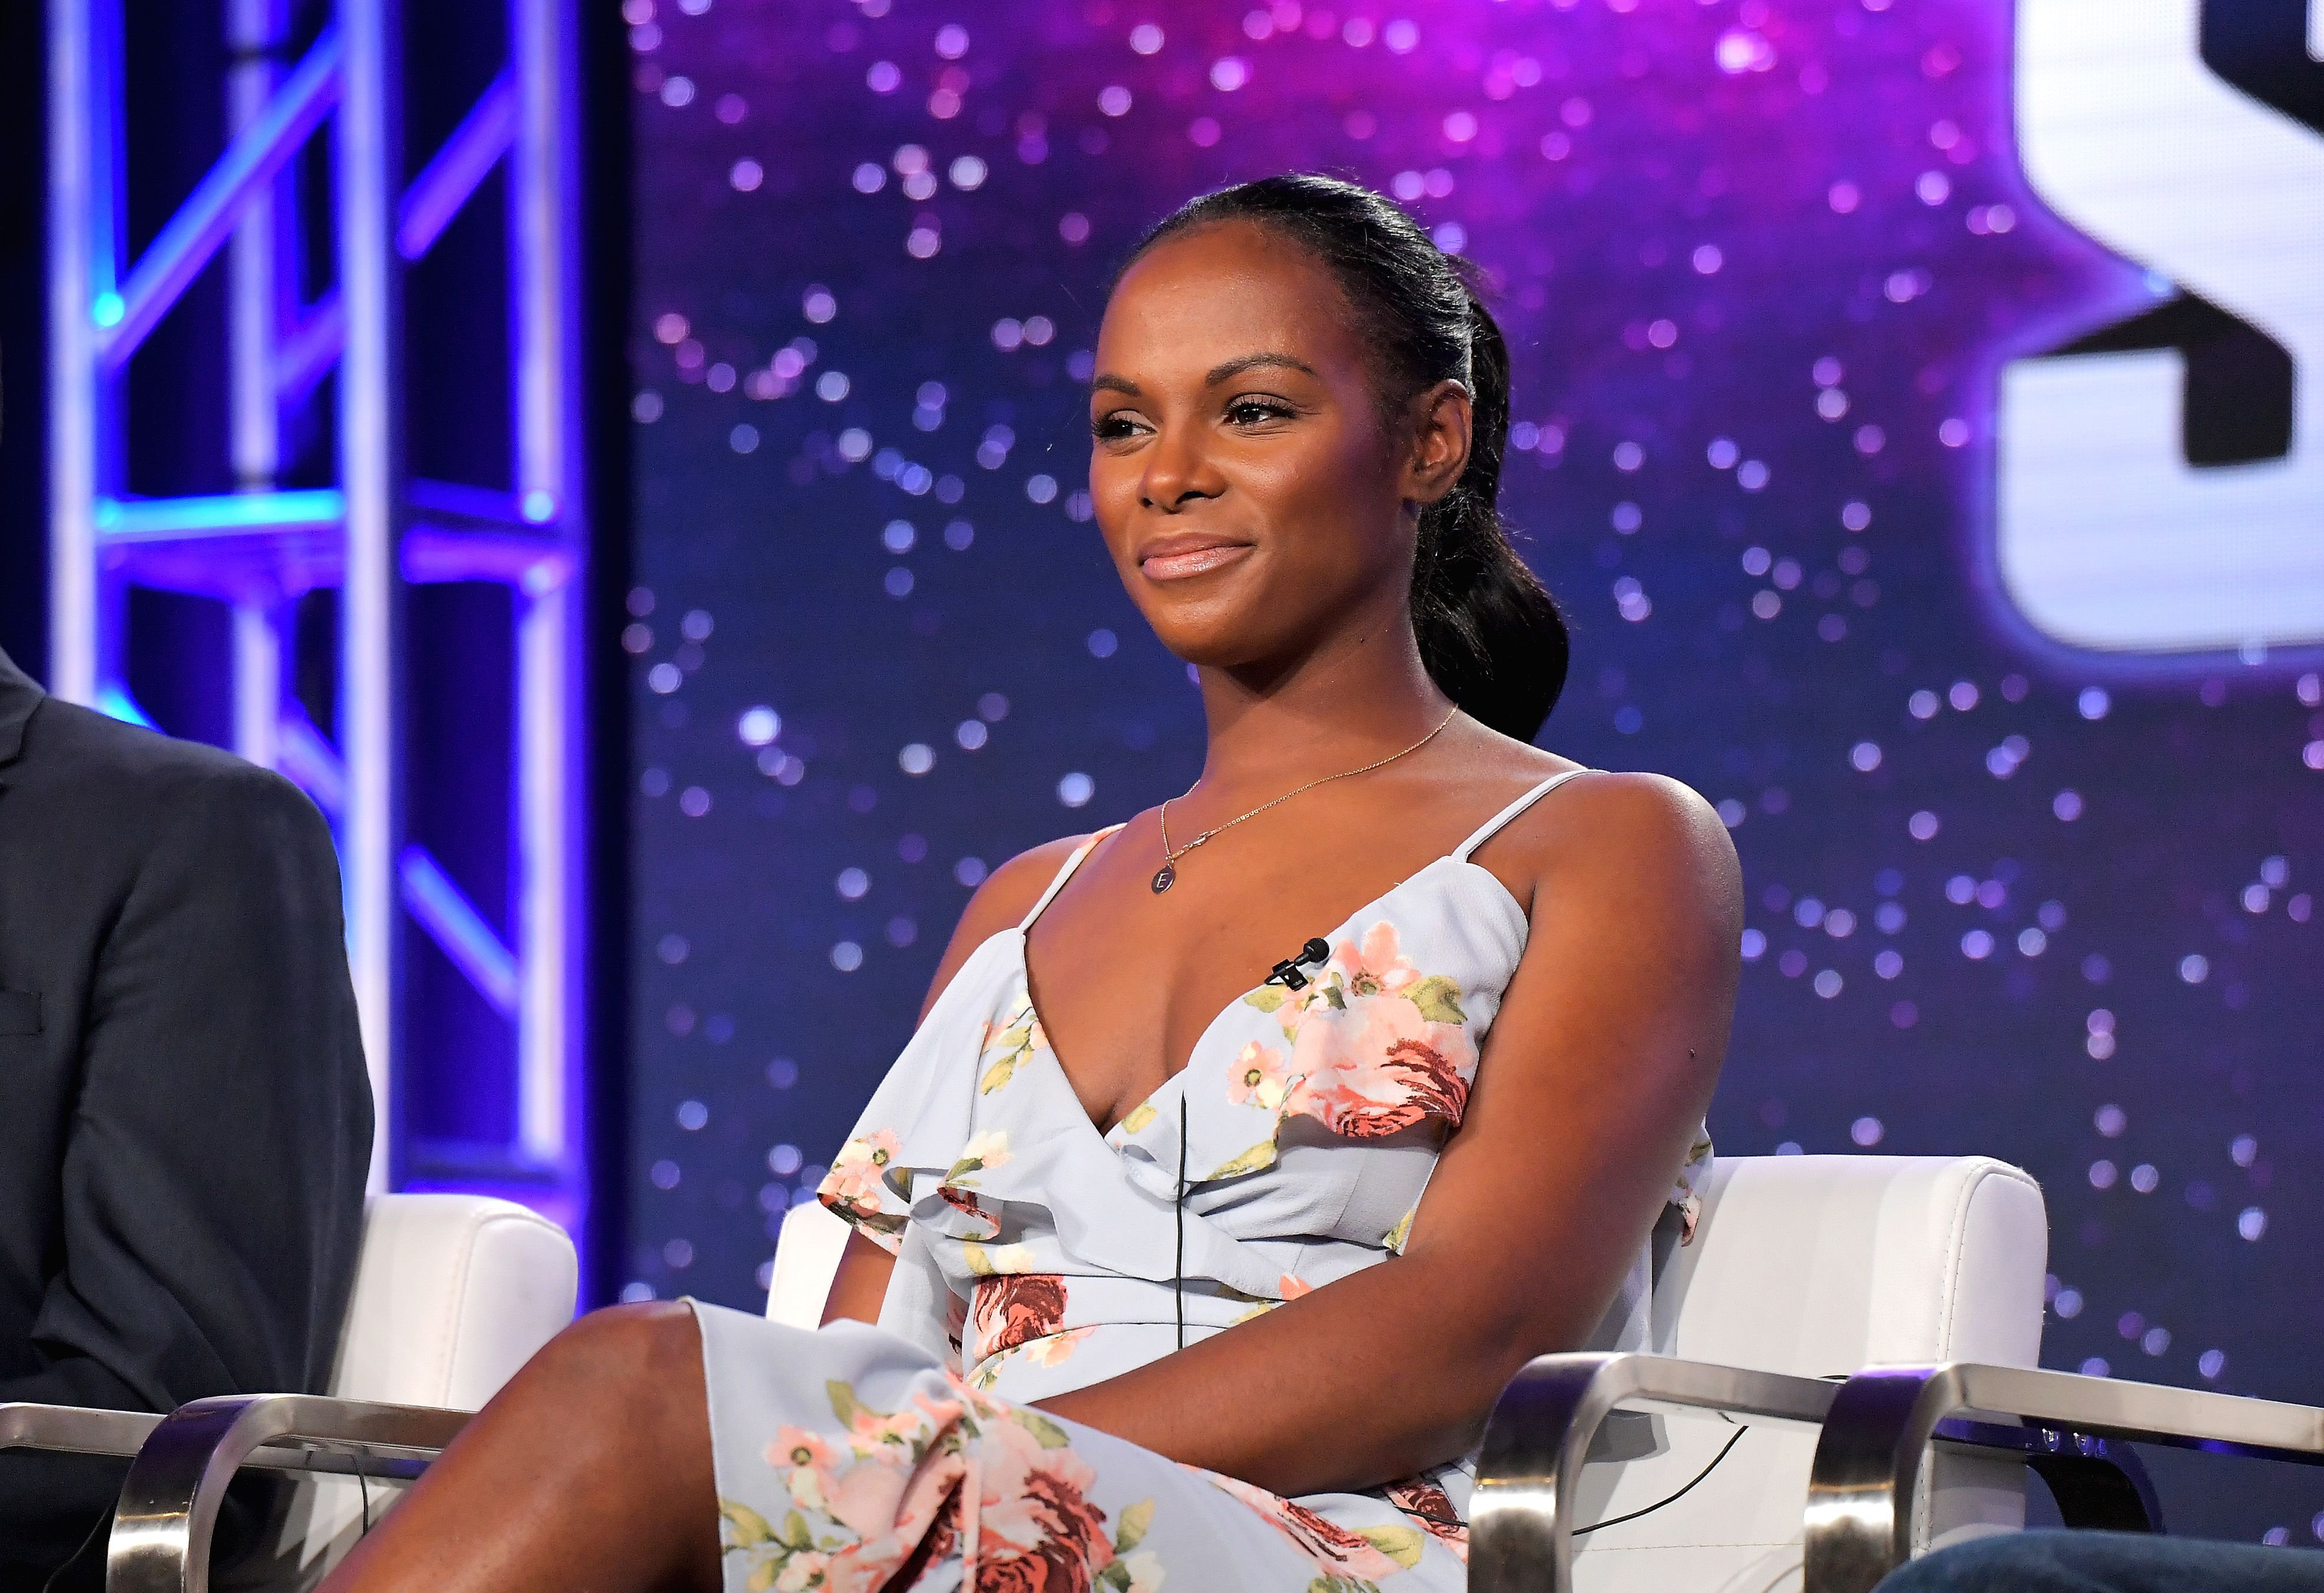 Tika Sumpter during the TCA Turner Winter Press Tour 2018 Presentation on January 11, 2018. | Source: Getty Images